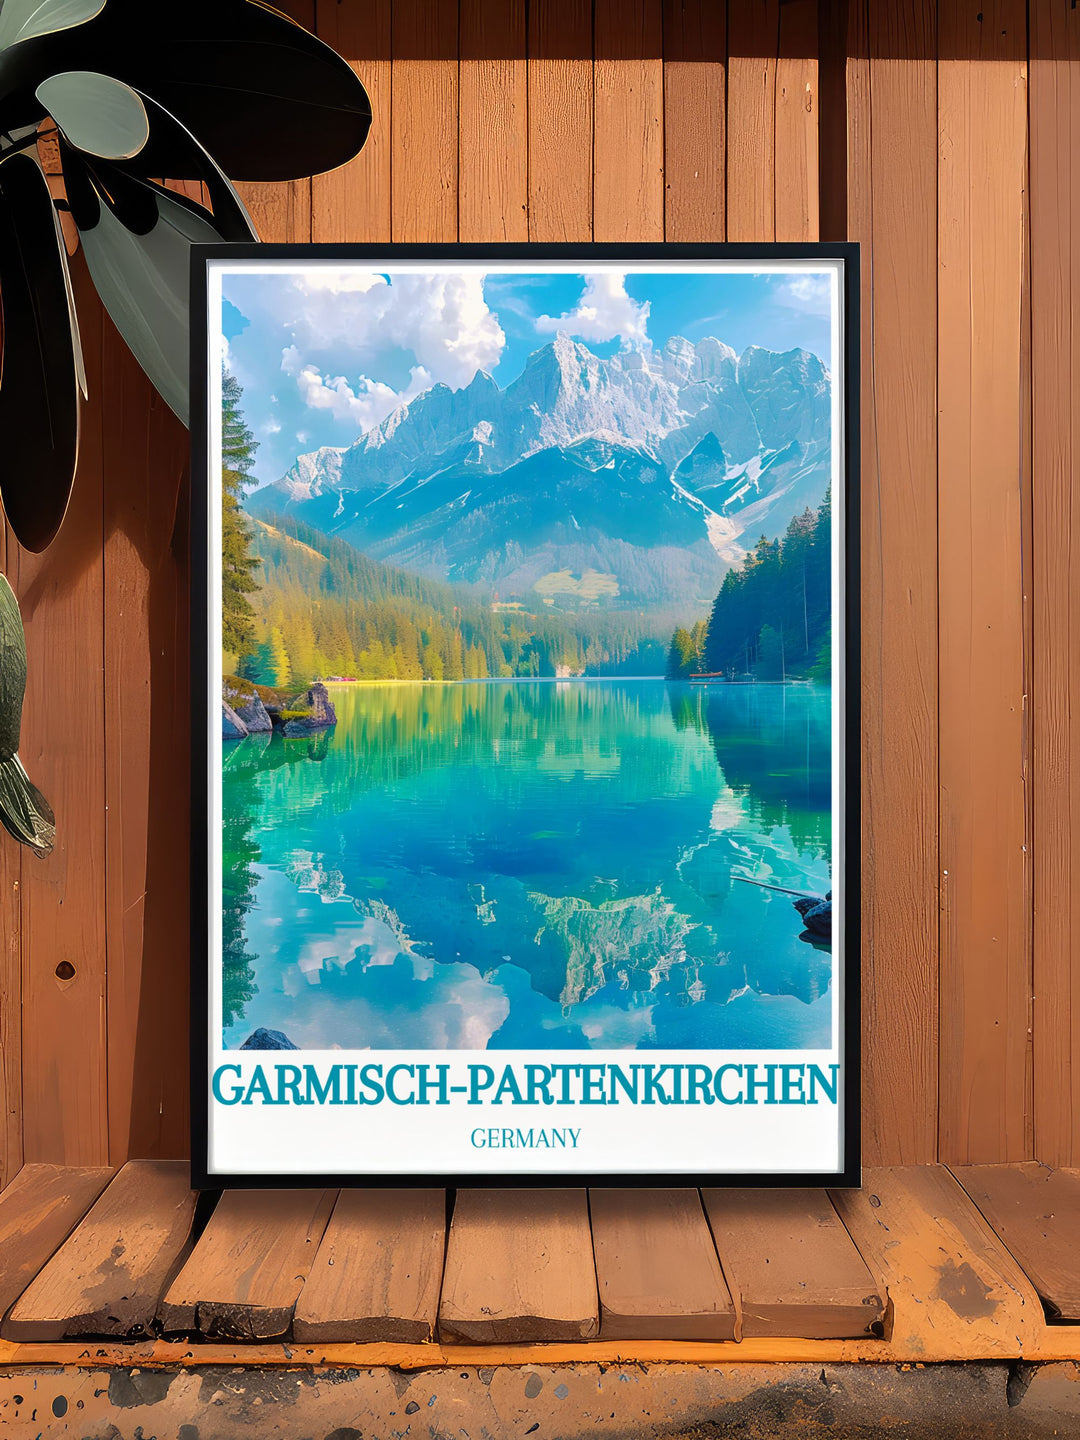 Framed art capturing the natural beauty of Eibsee, with its clear blue waters and stunning alpine backdrop, reflecting the tranquil and picturesque landscapes of the Bavarian Alps near Garmisch Partenkirchen.